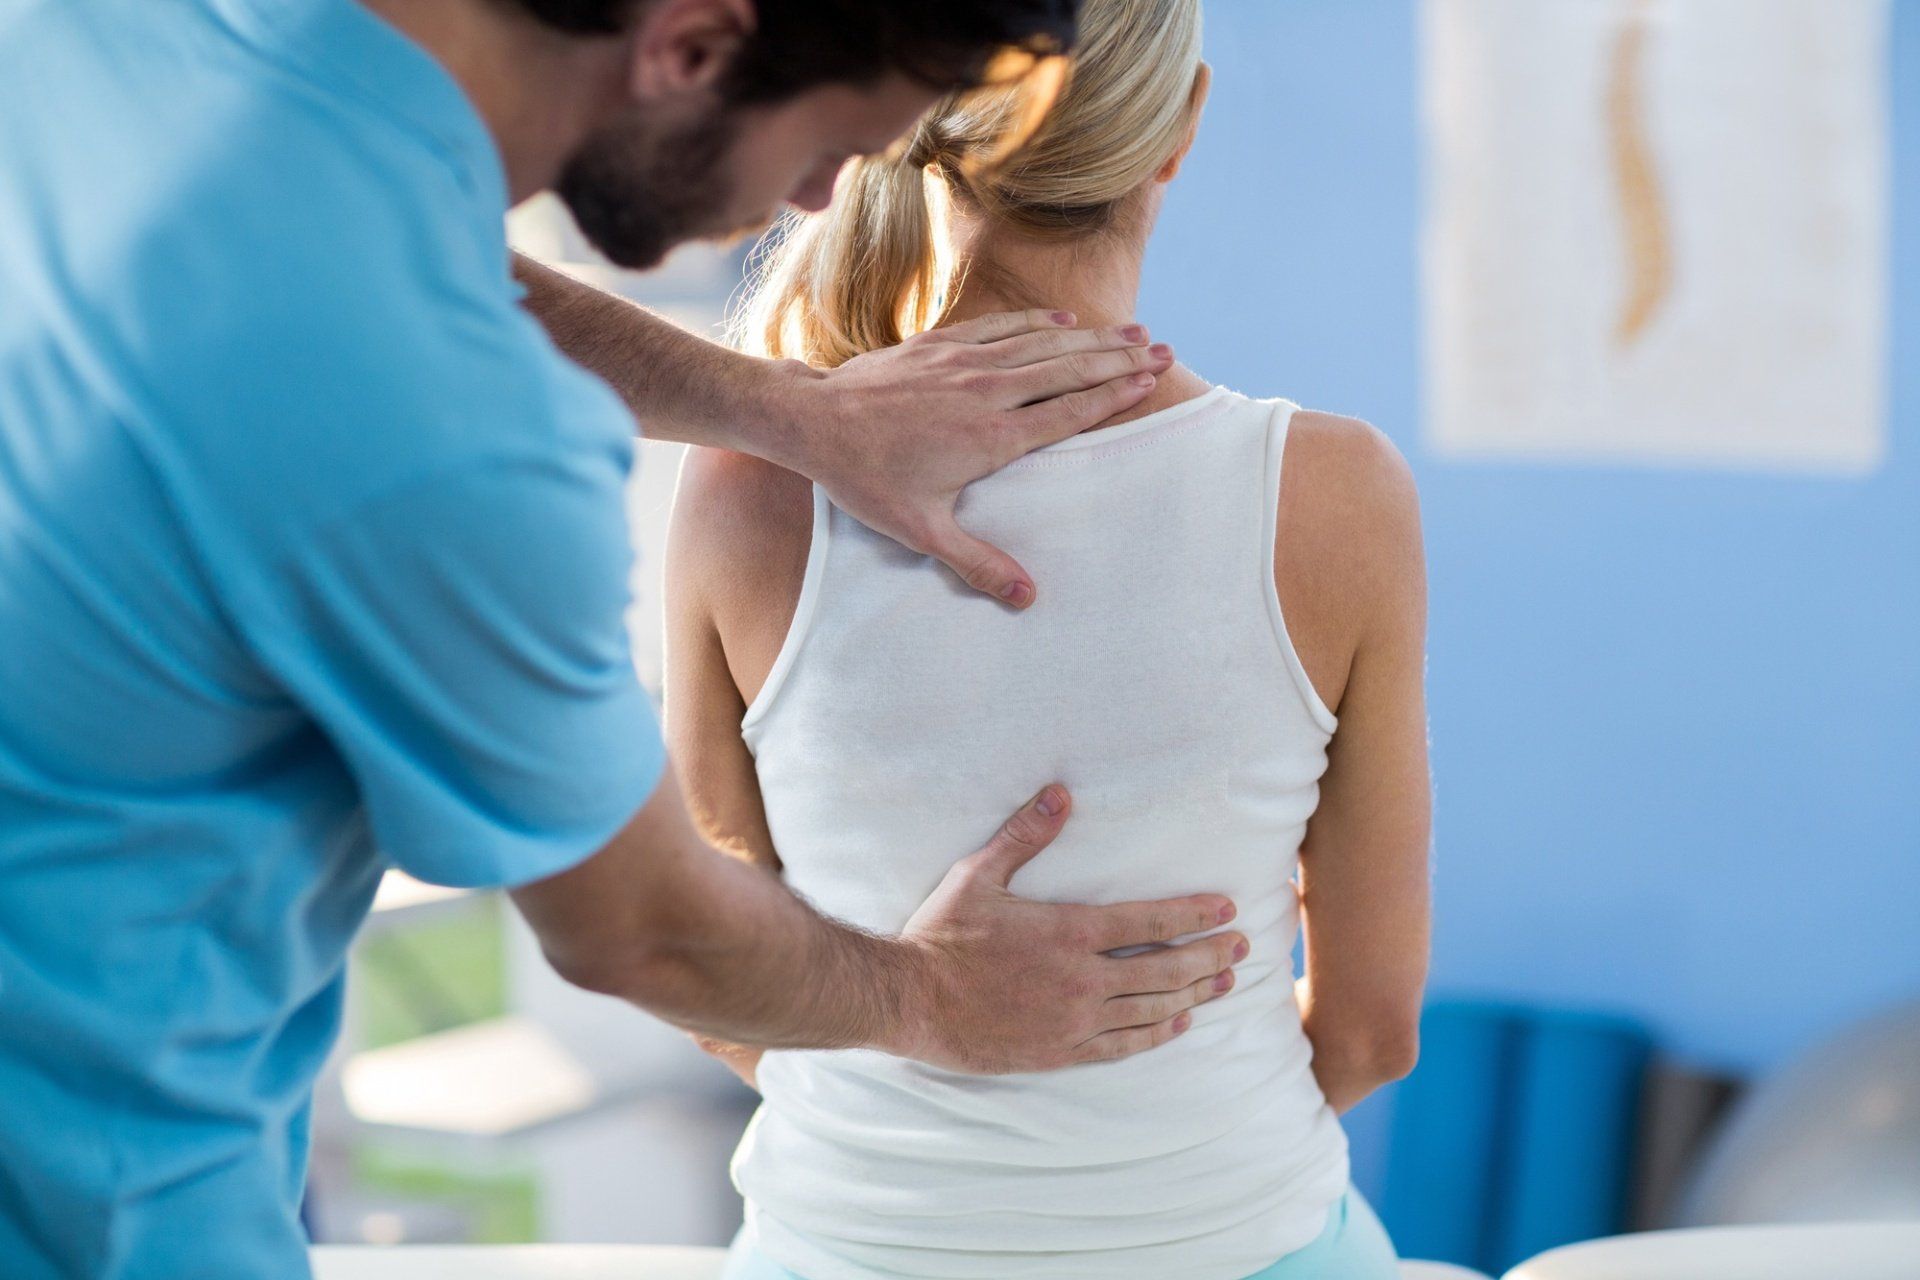 Can a Chiropractor Help With Whiplash Pain?